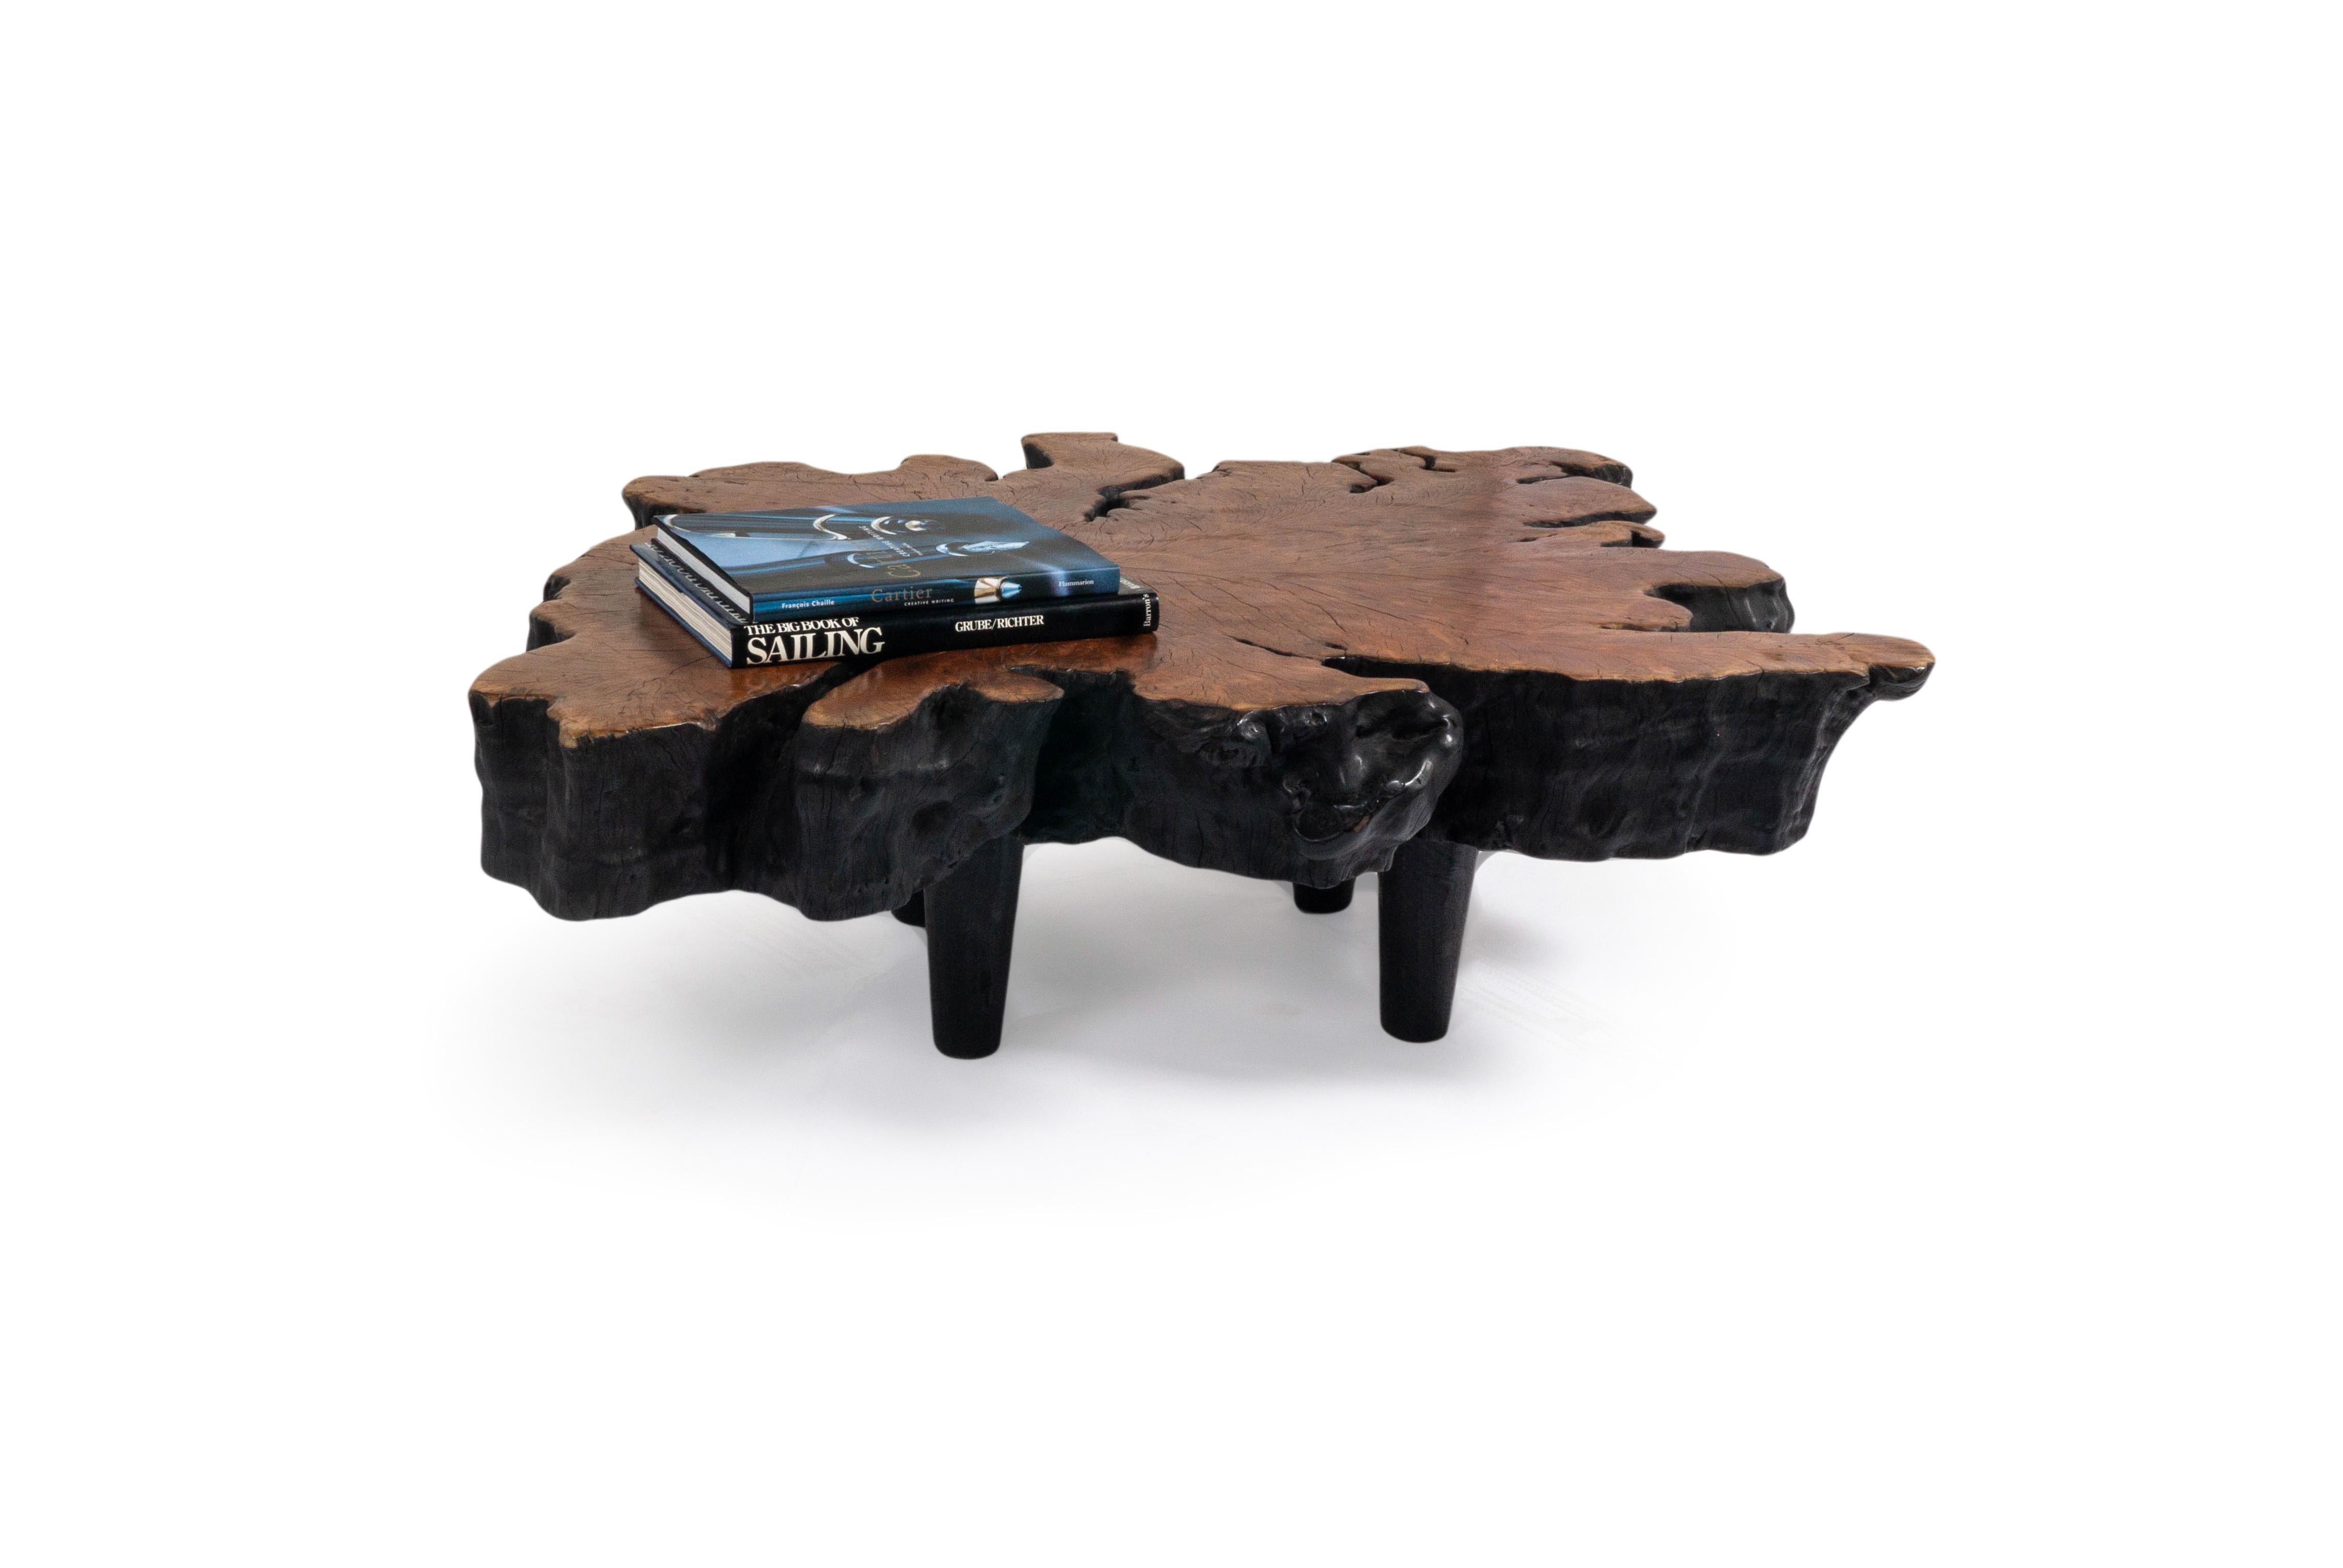 This organic form lychee wood coffee table features a beautiful ebonized exterior and a cinnamon toned top that adds warmth and contrast to any space. 

This piece is a part of Brendan Bass’s one-of-a-kind collection, Le Monde. French for “The